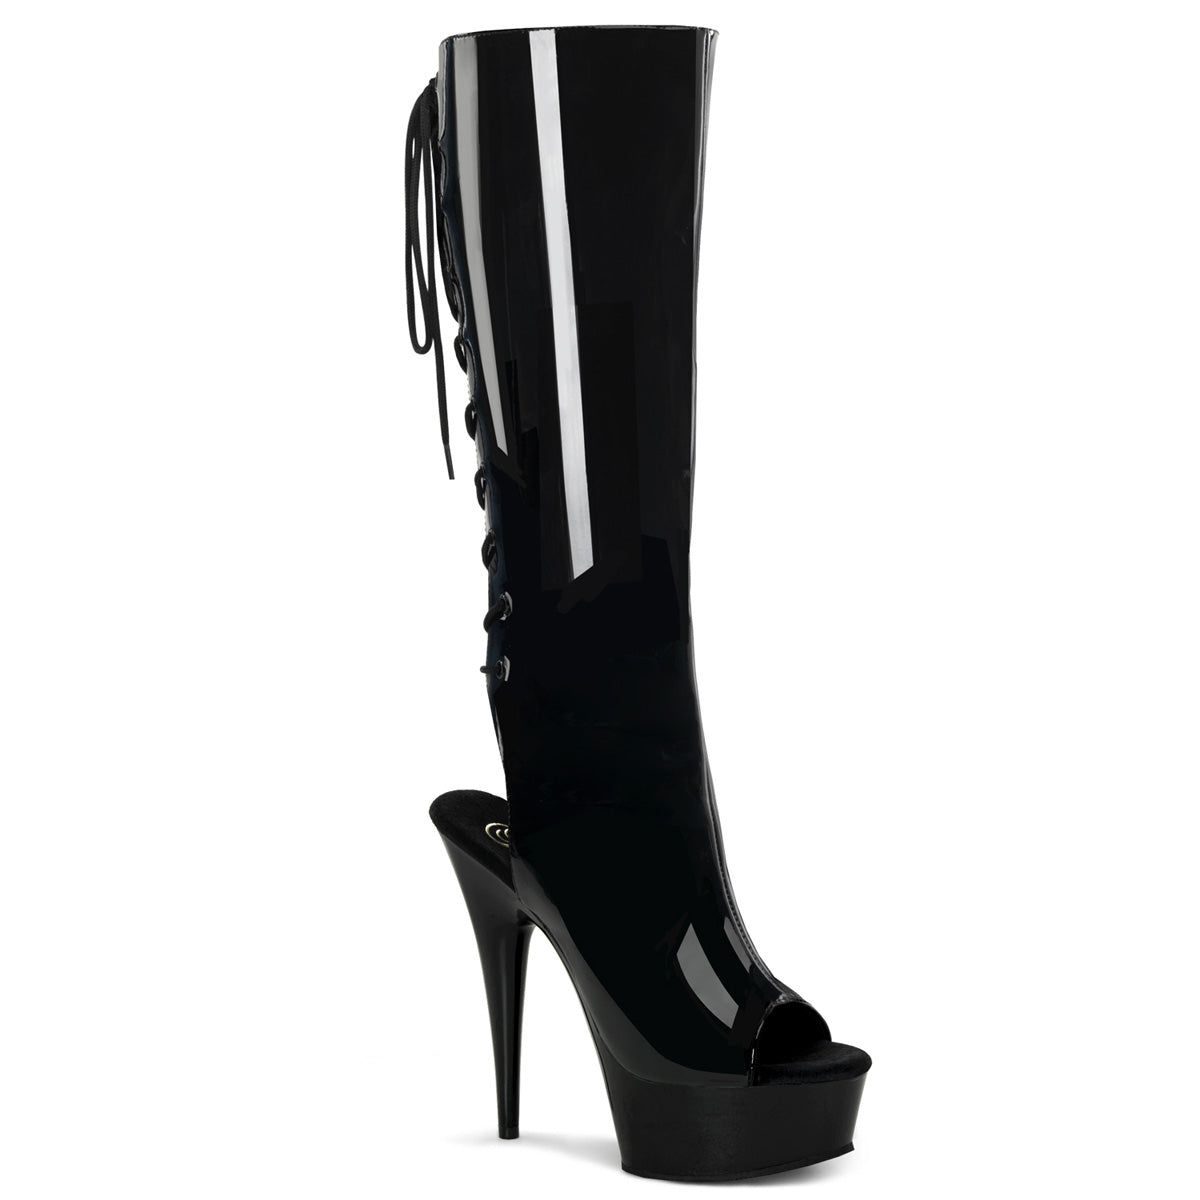 DELIGHT-2018 6 Inch Heel Black Patent Pole Dancing Platforms-Pleaser- Sexy Shoes